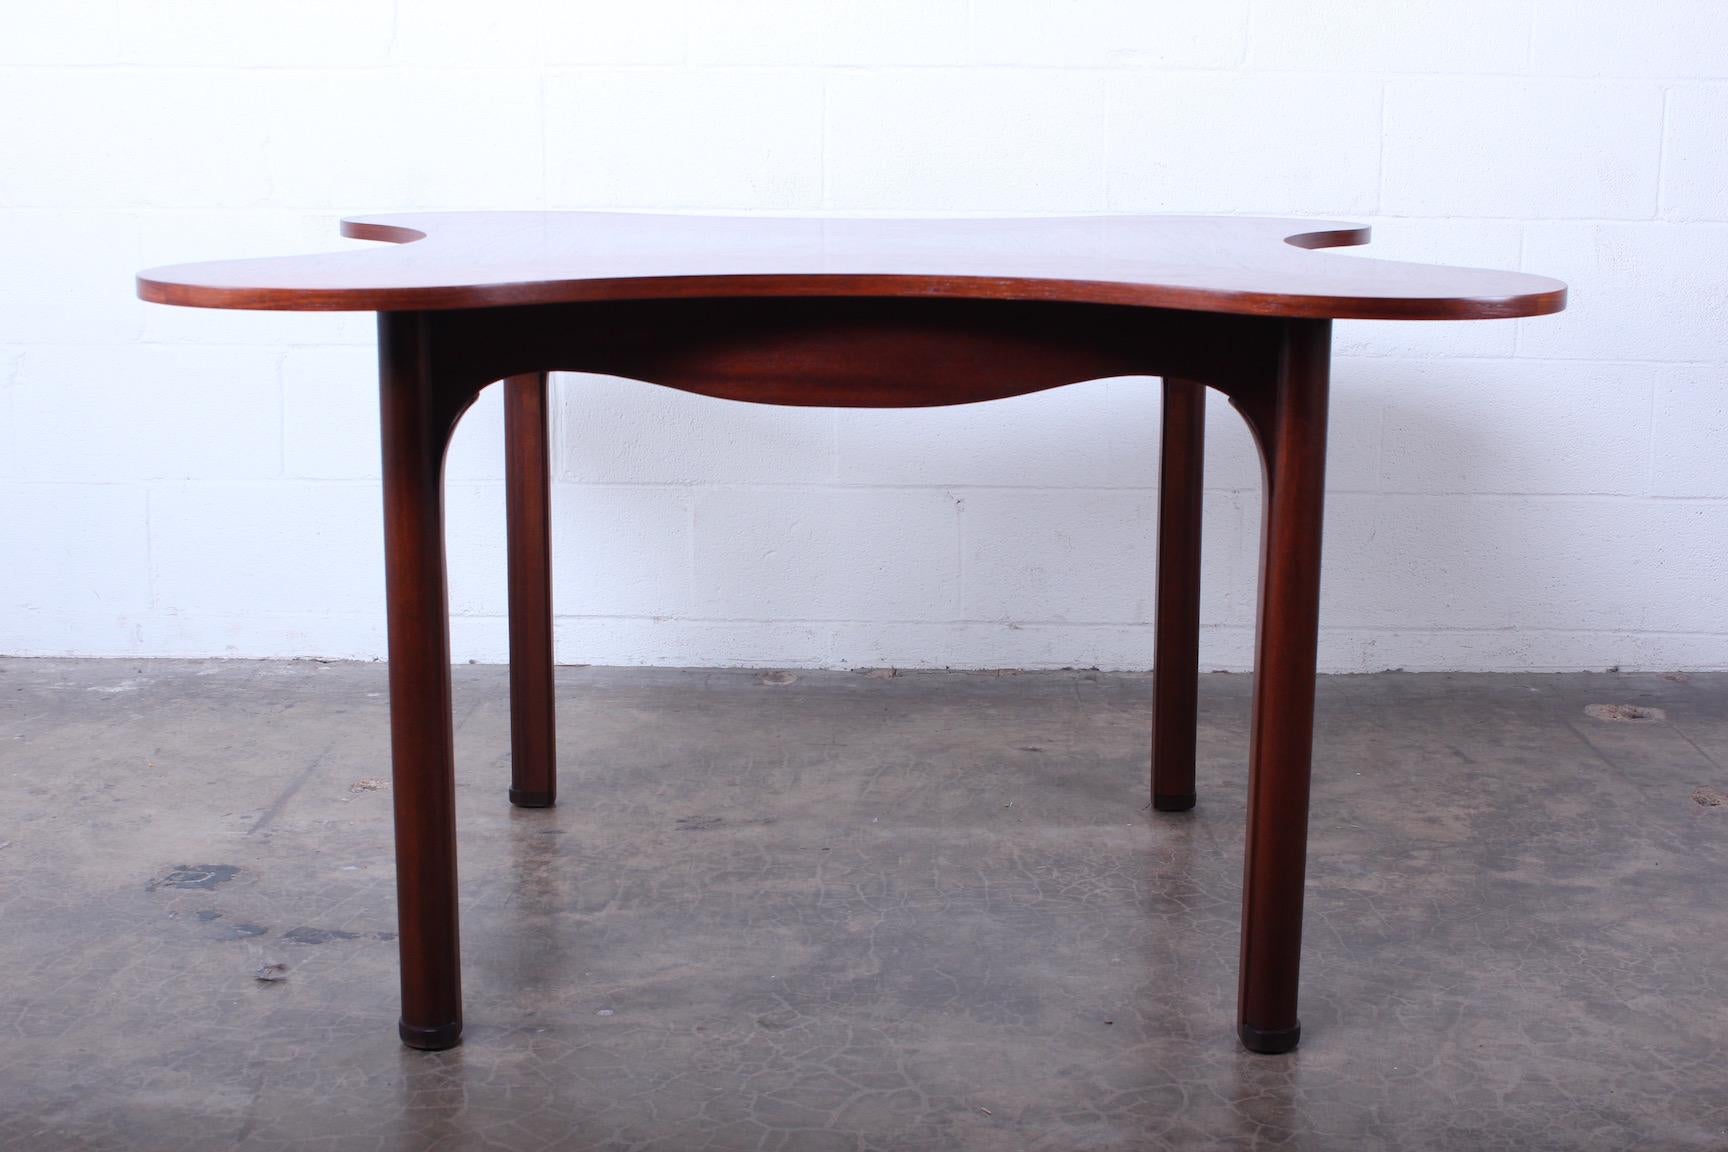 The clover game table in rosewood and mahogany by Edward Wormley for Dunbar.